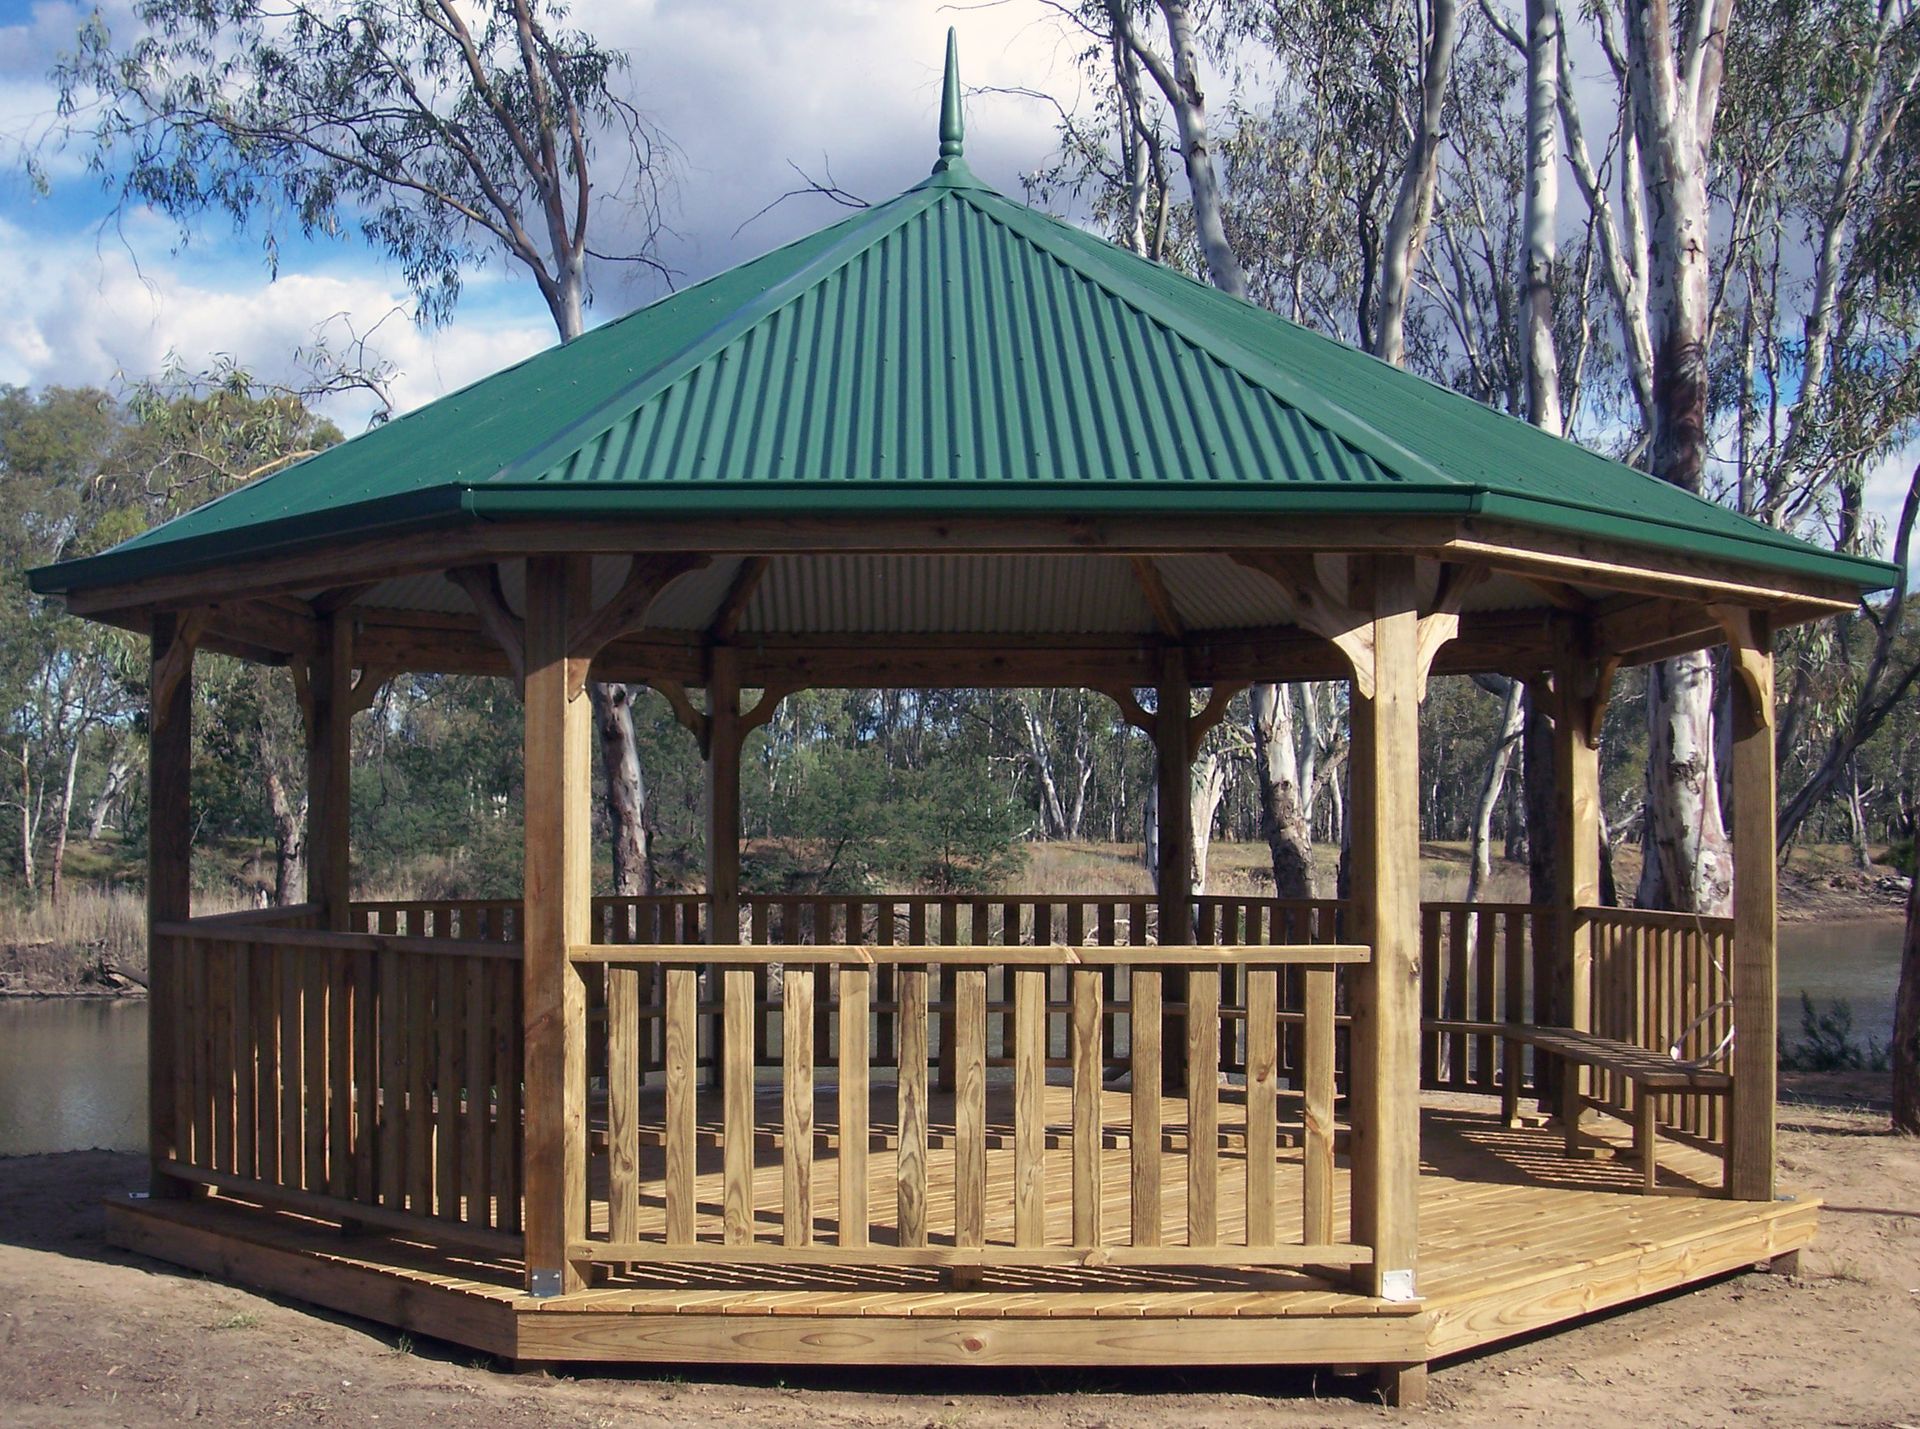  A Gazebo With A Green Roof Is Surrounded By Trees - Gazebos in Albury, NSW